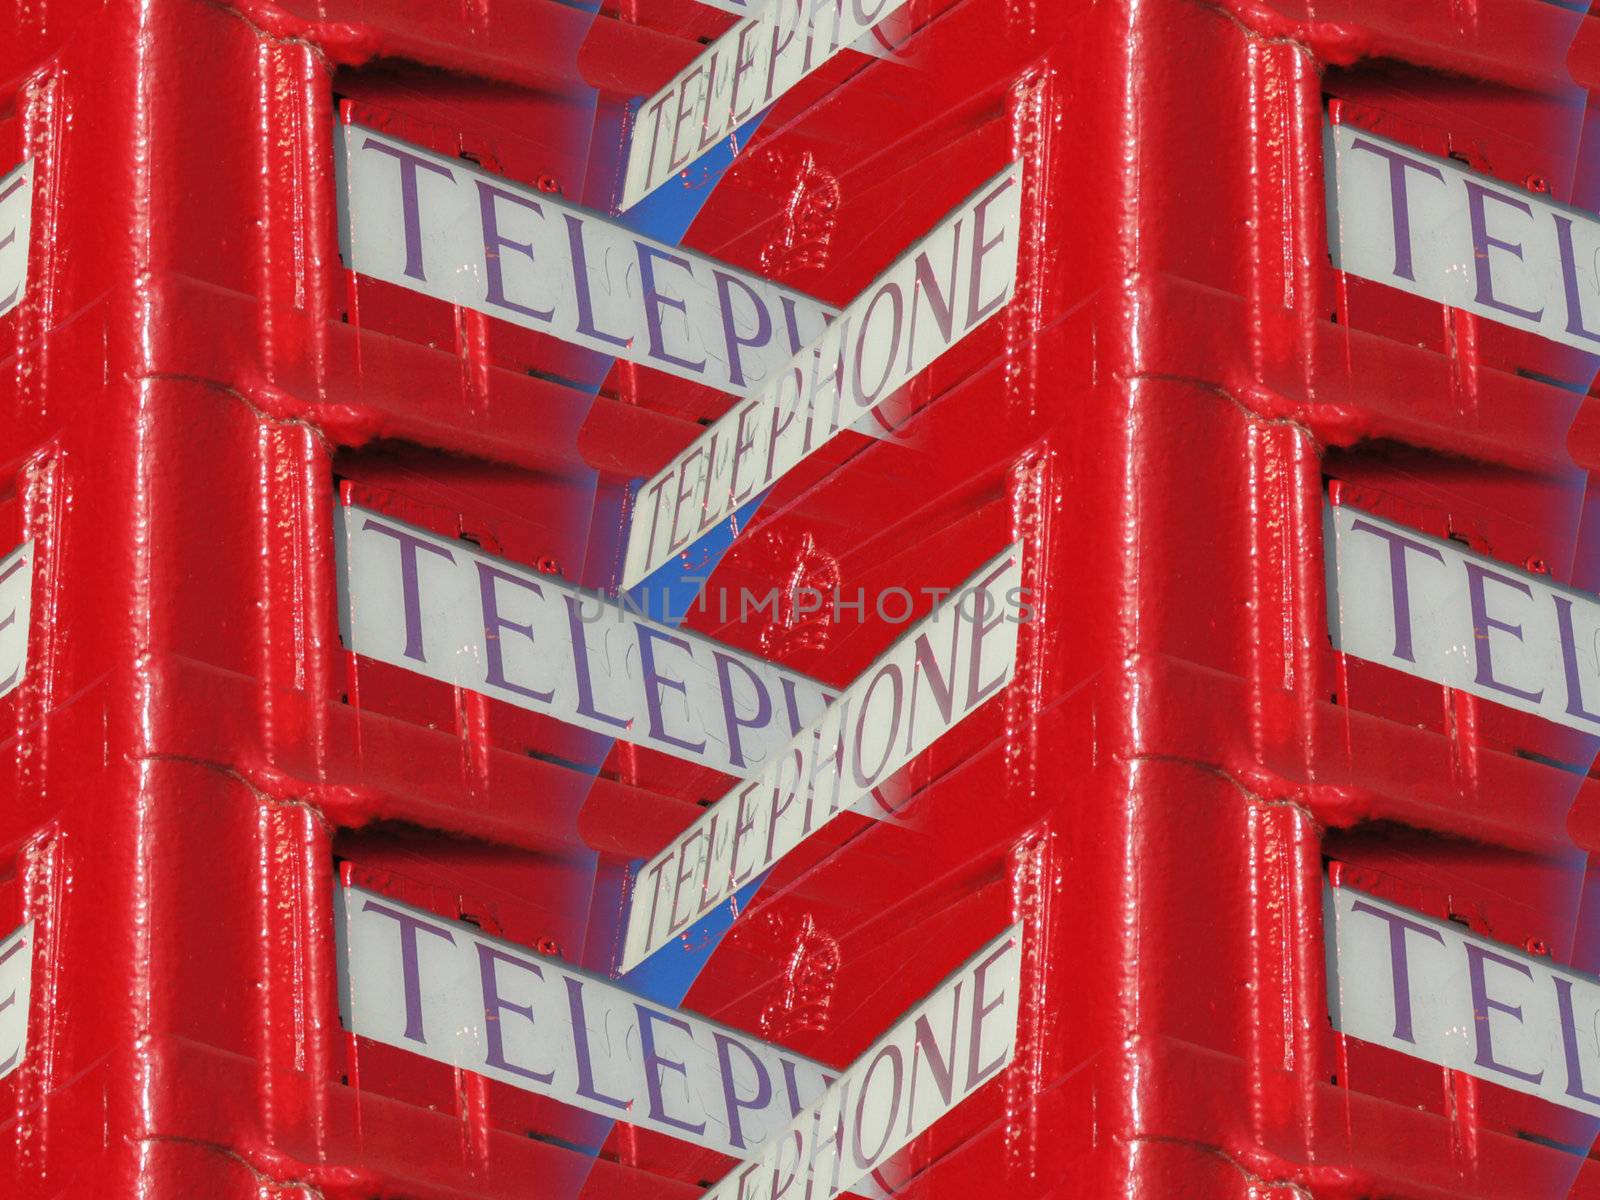 Telephone boxes abstract by tommroch